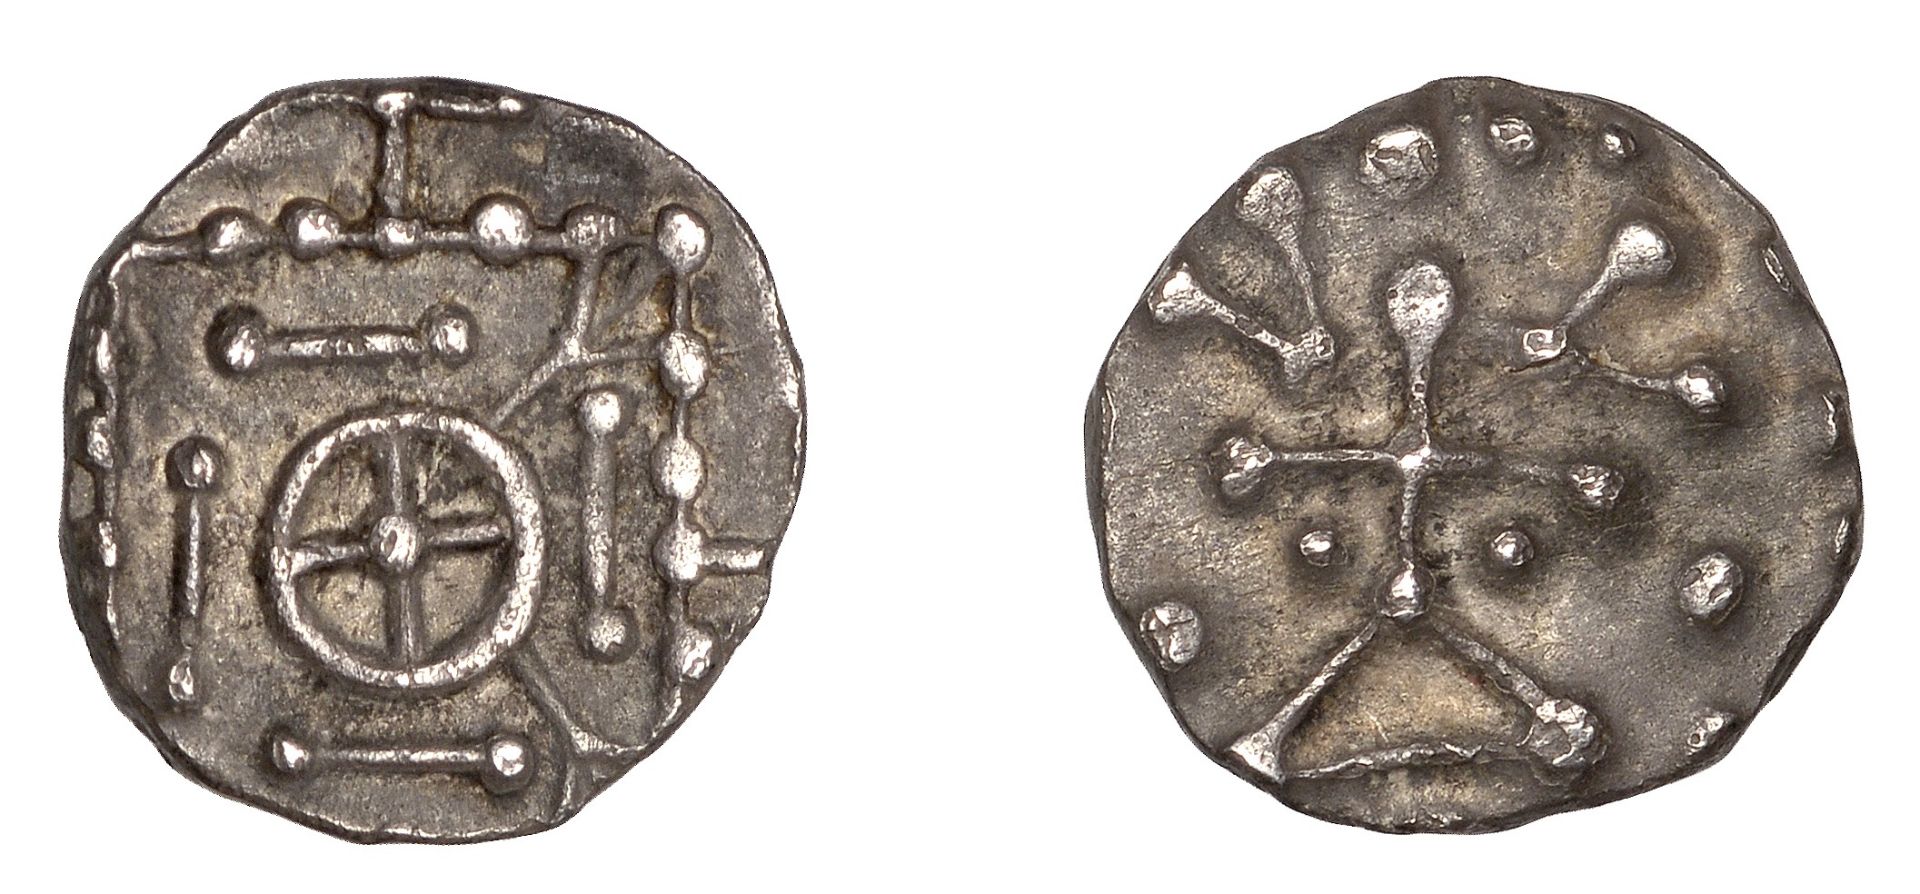 Early Anglo-Saxon Period, Sceatta, Continental series D, type 8 related, cross in circle wit...